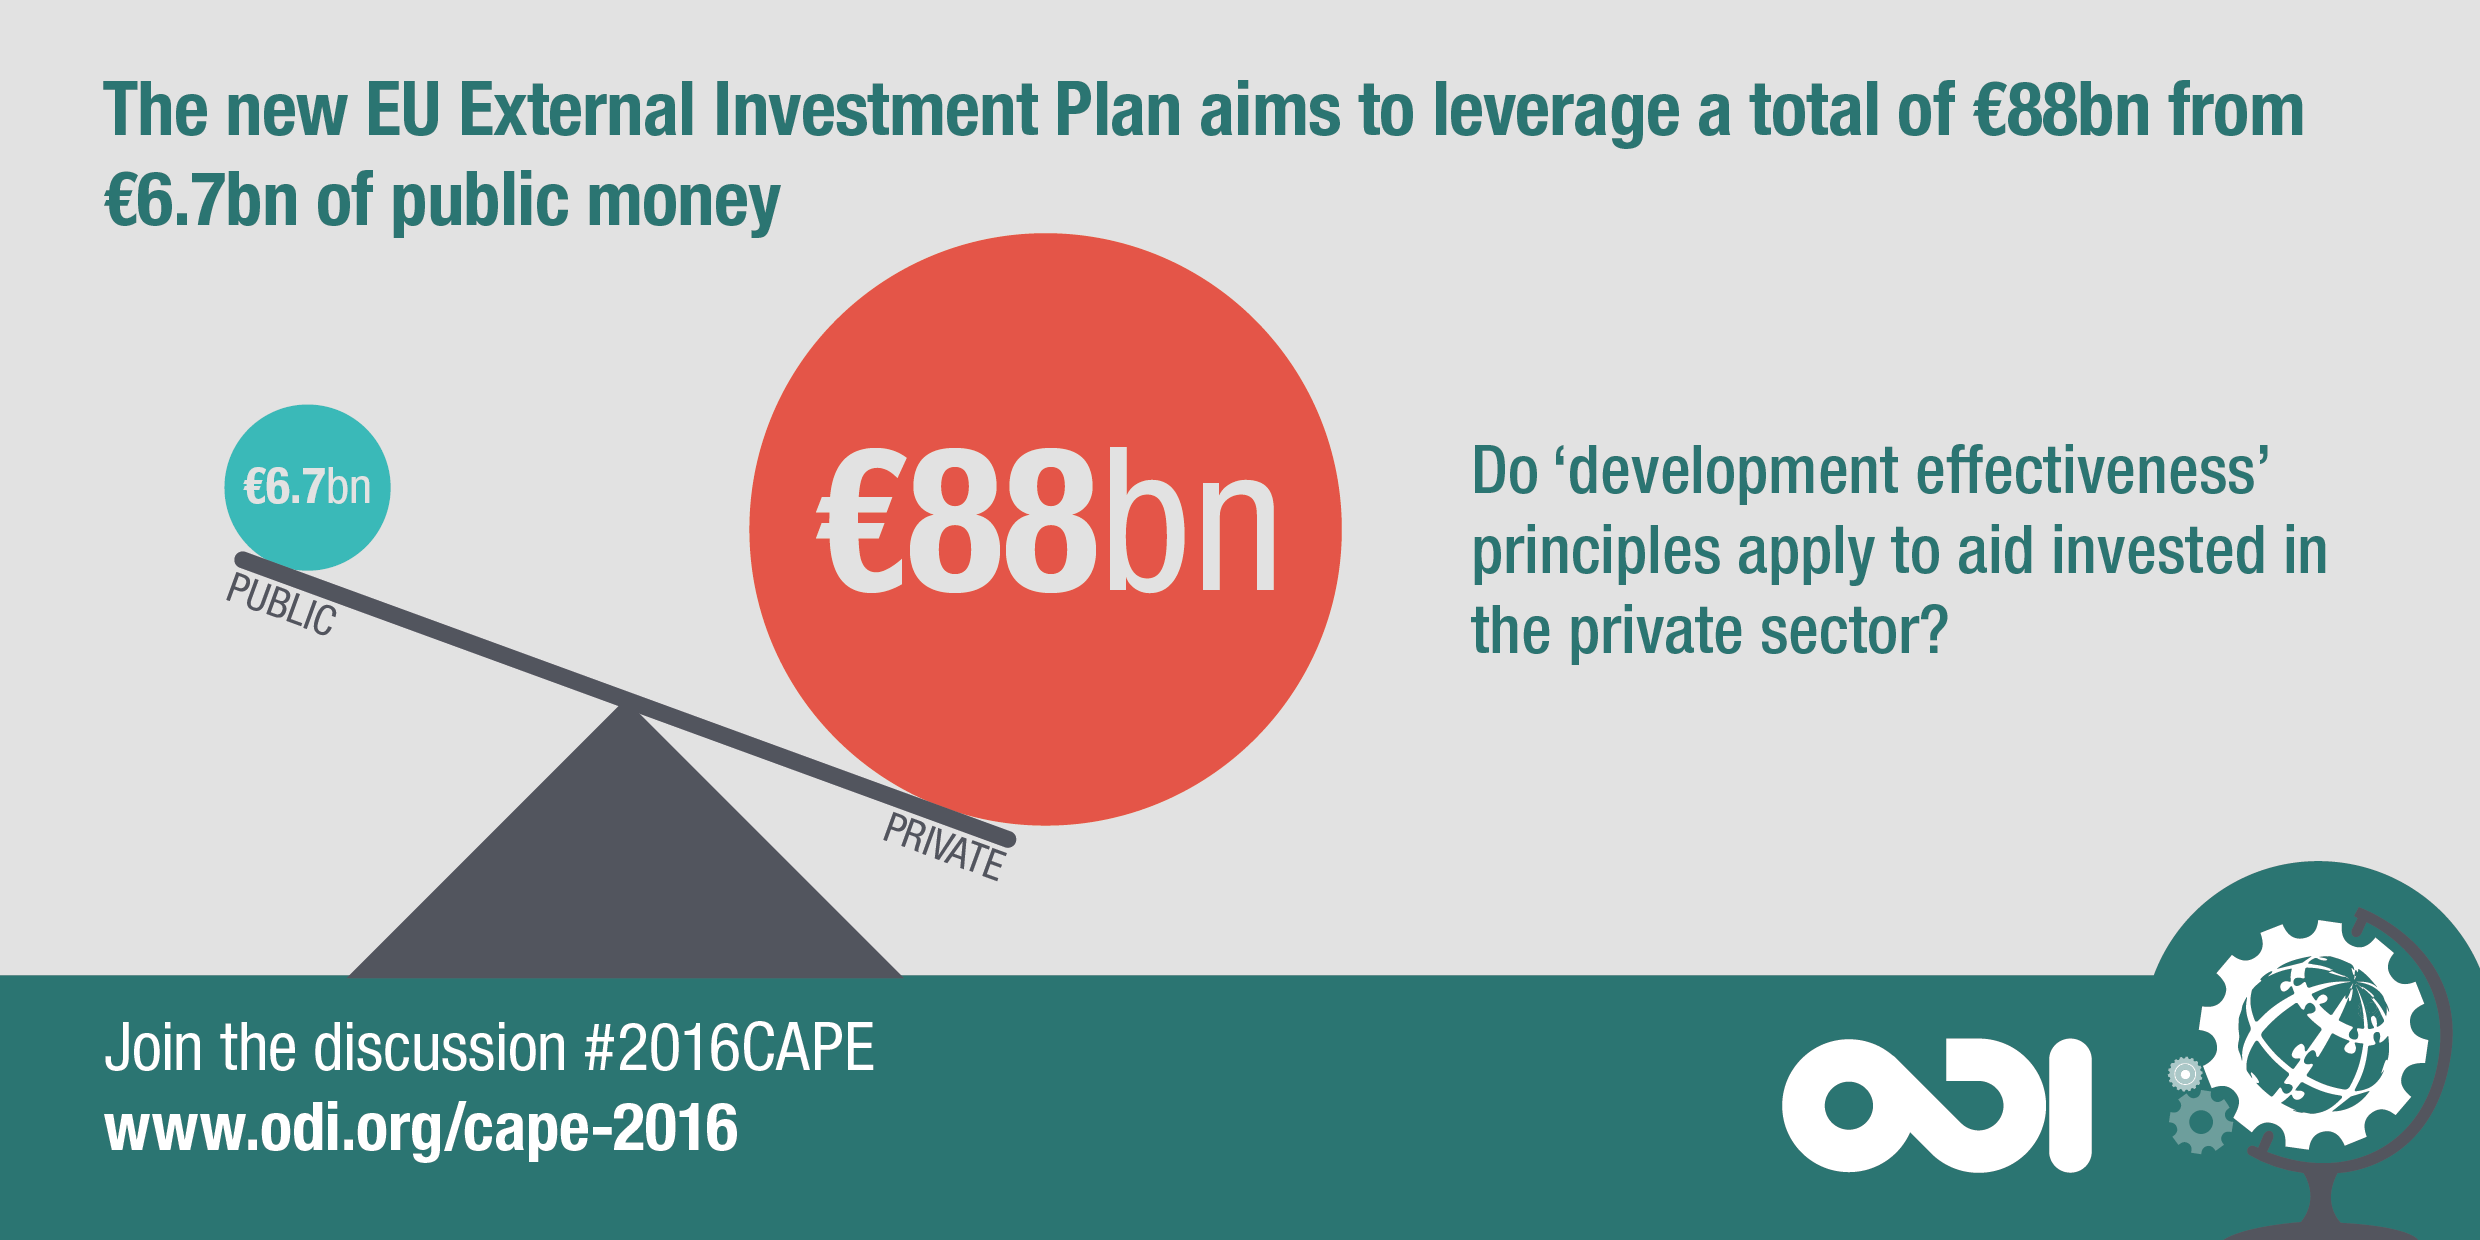 Do 'development effectiveness' principles apply to aid invested in the private sector?